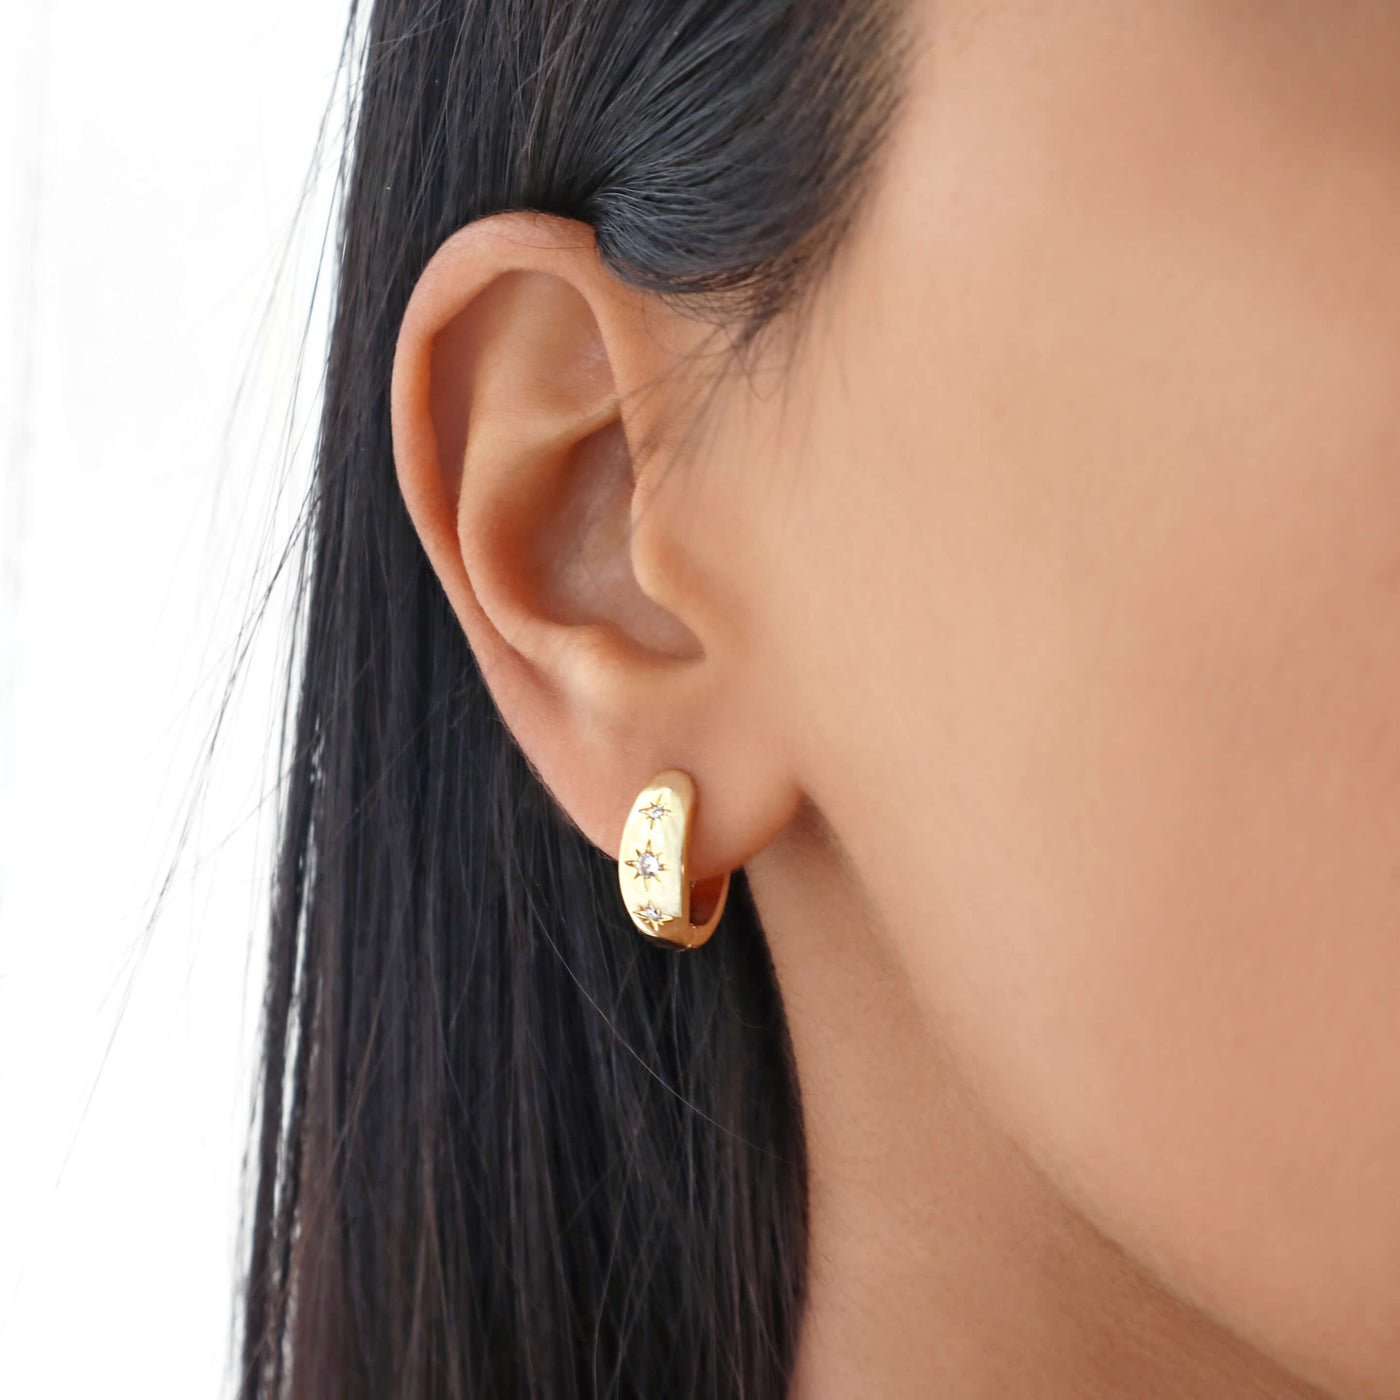 Dainty minimal small thick gold hoop earrings with 3 cubic zirconia stars. 18k gold-plated copper.